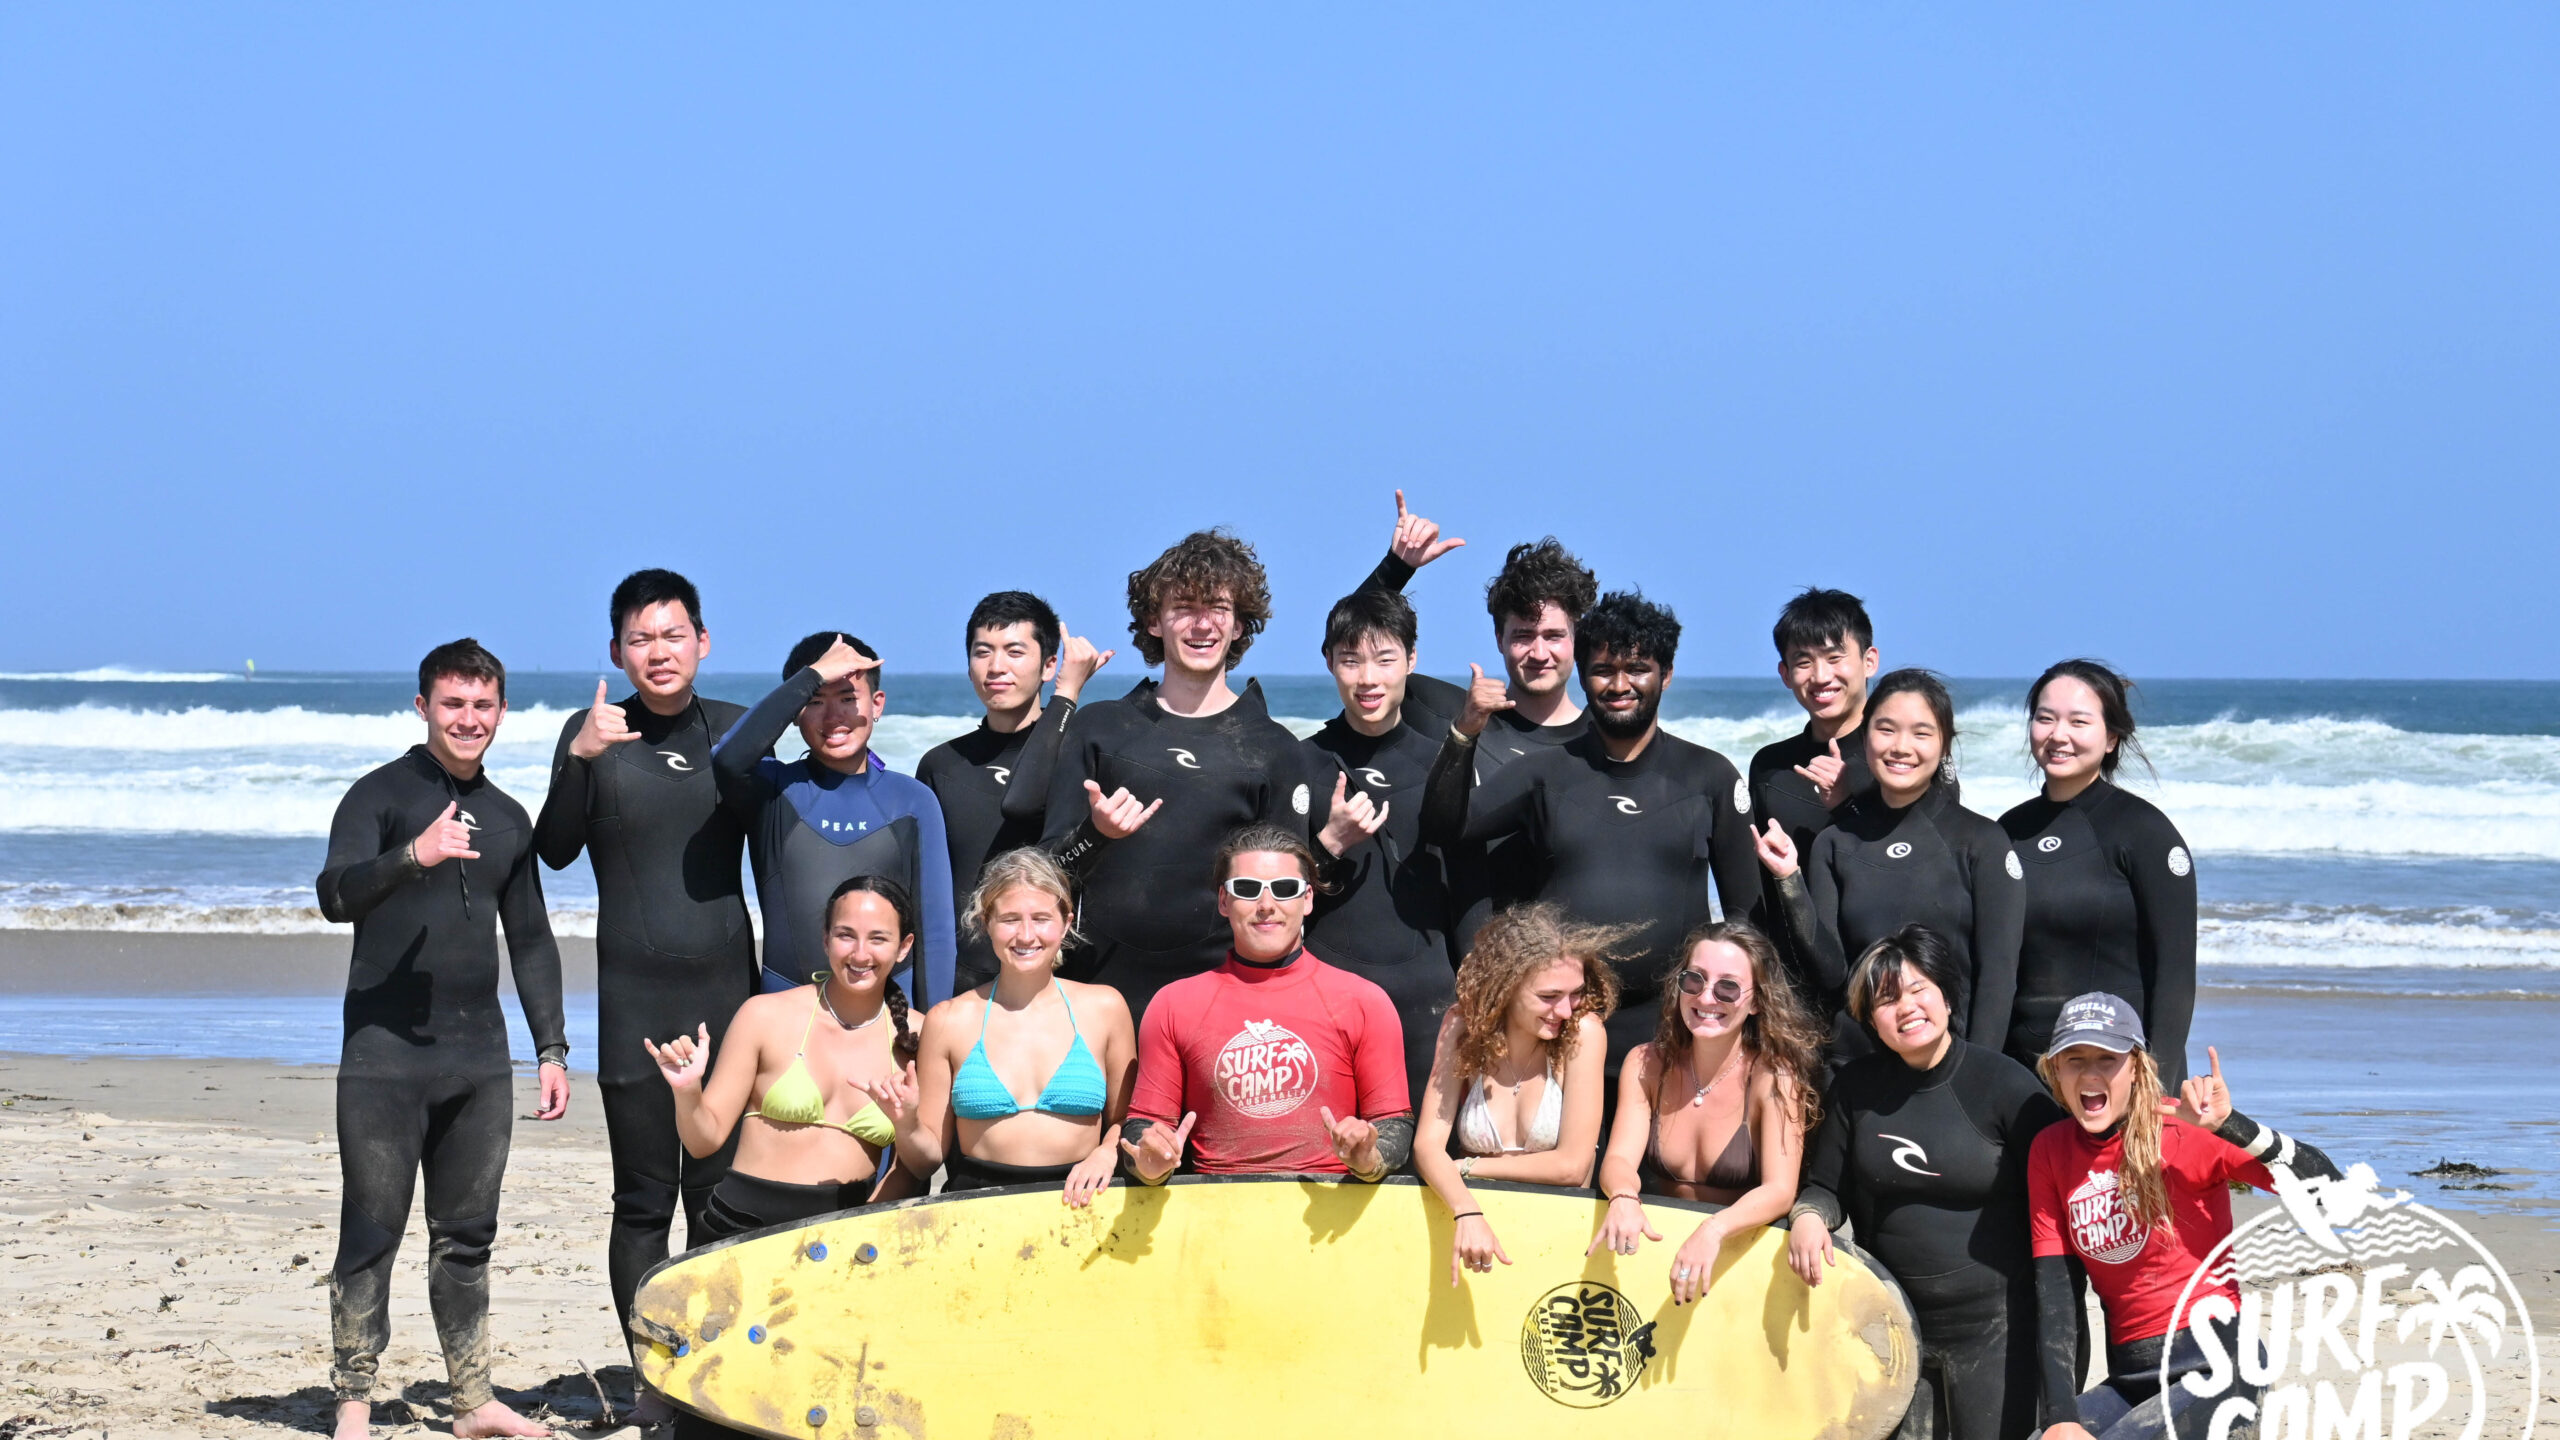 A group of over 10 study abroad students stand together on the beach with surfing attire on.